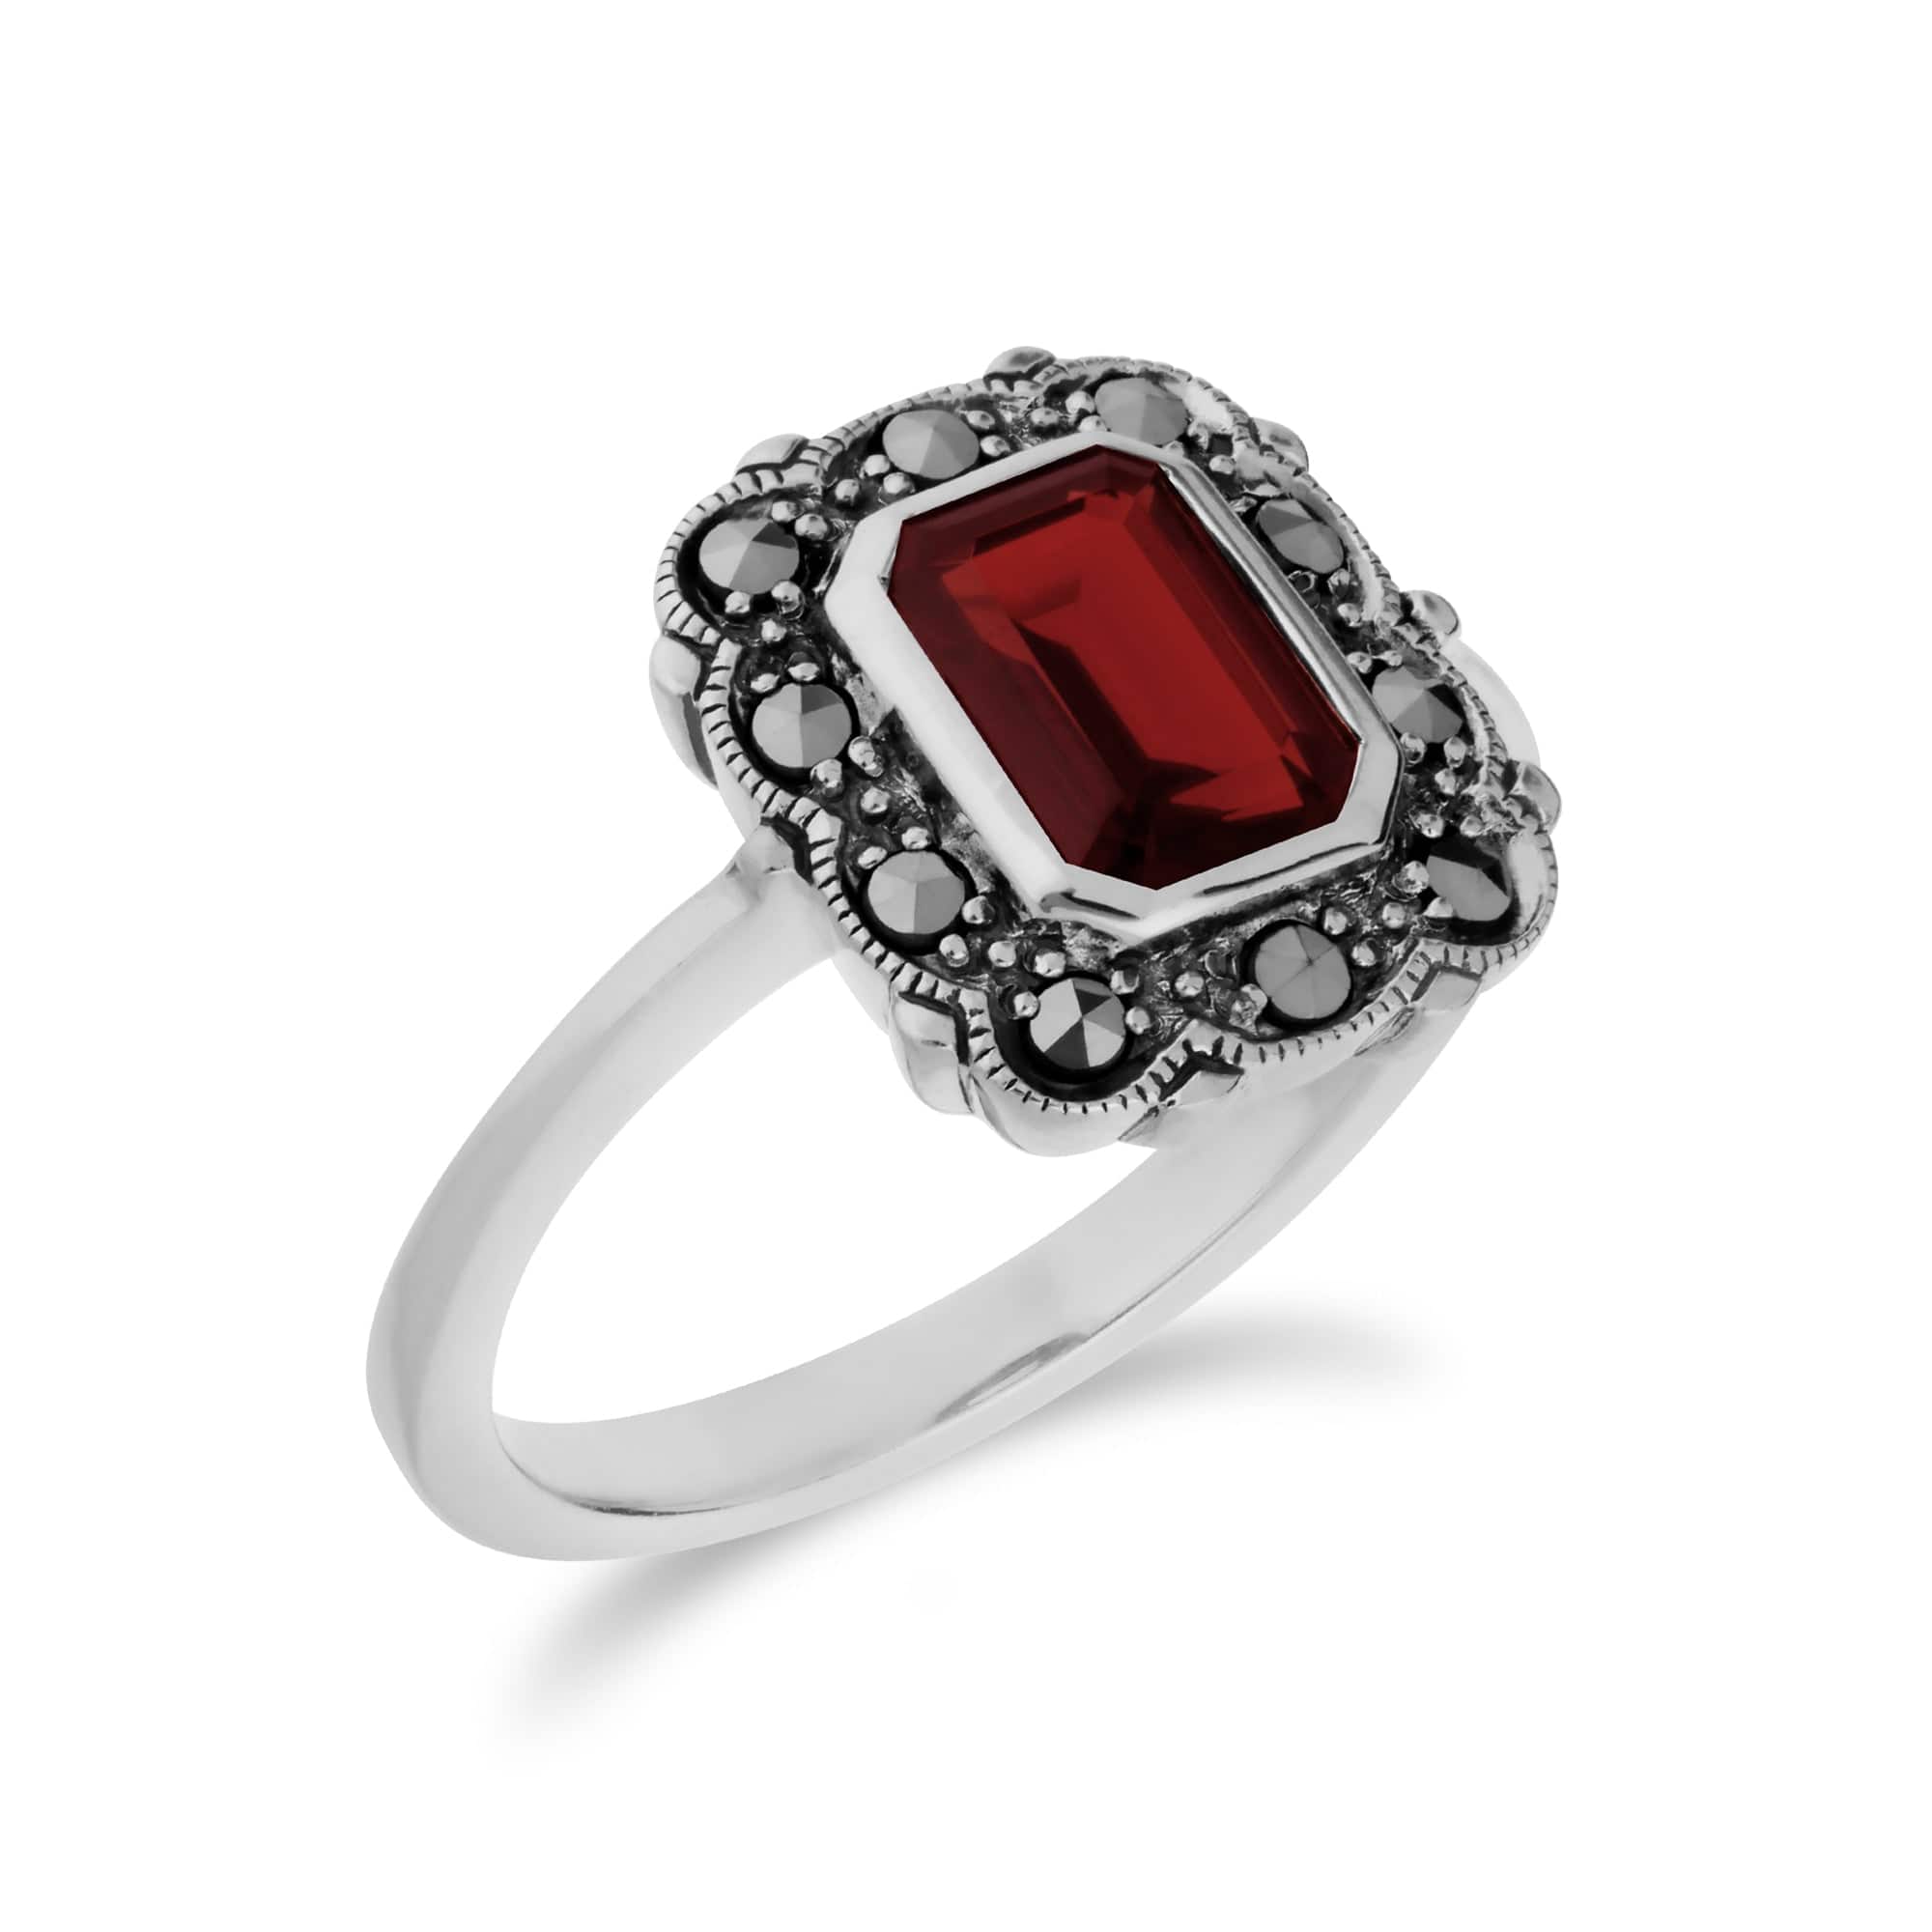 214R597107925 Art Nouveau Style Octagon Garnet & Marcasite Border Ring in 925 Sterling Silver 2